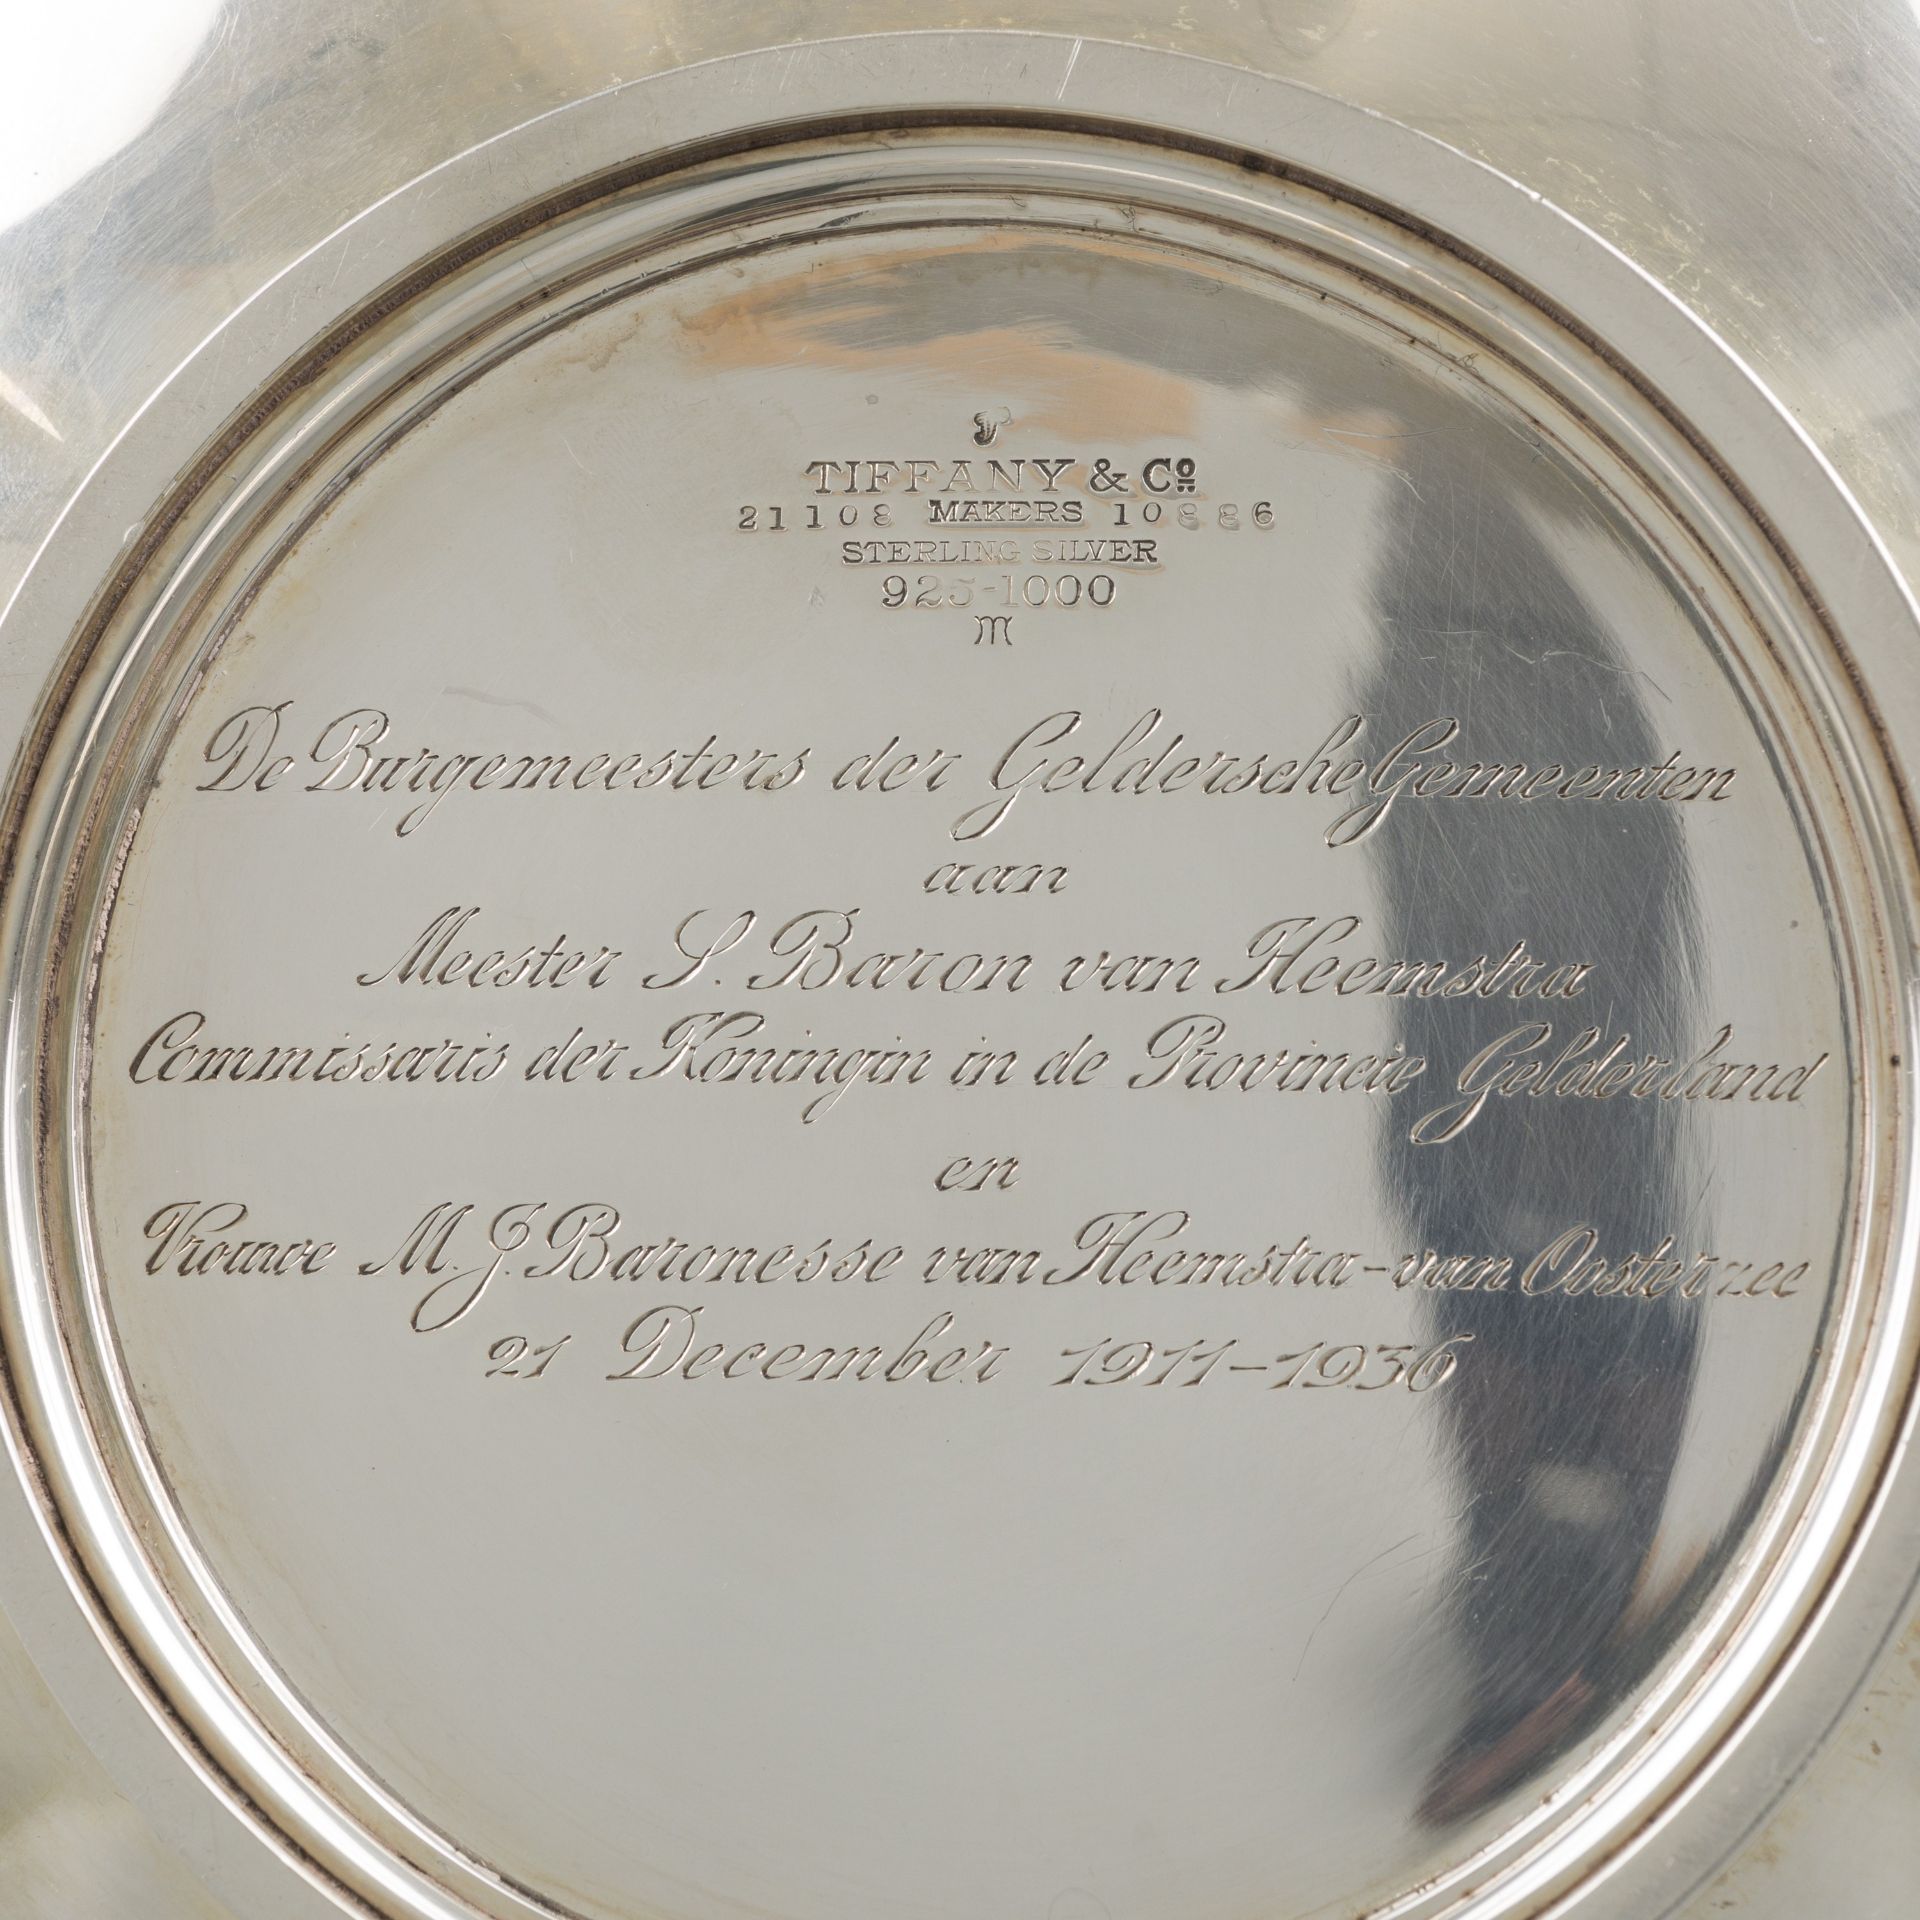 Tiffany & Co. Fruit bowl silver. - Image 2 of 2